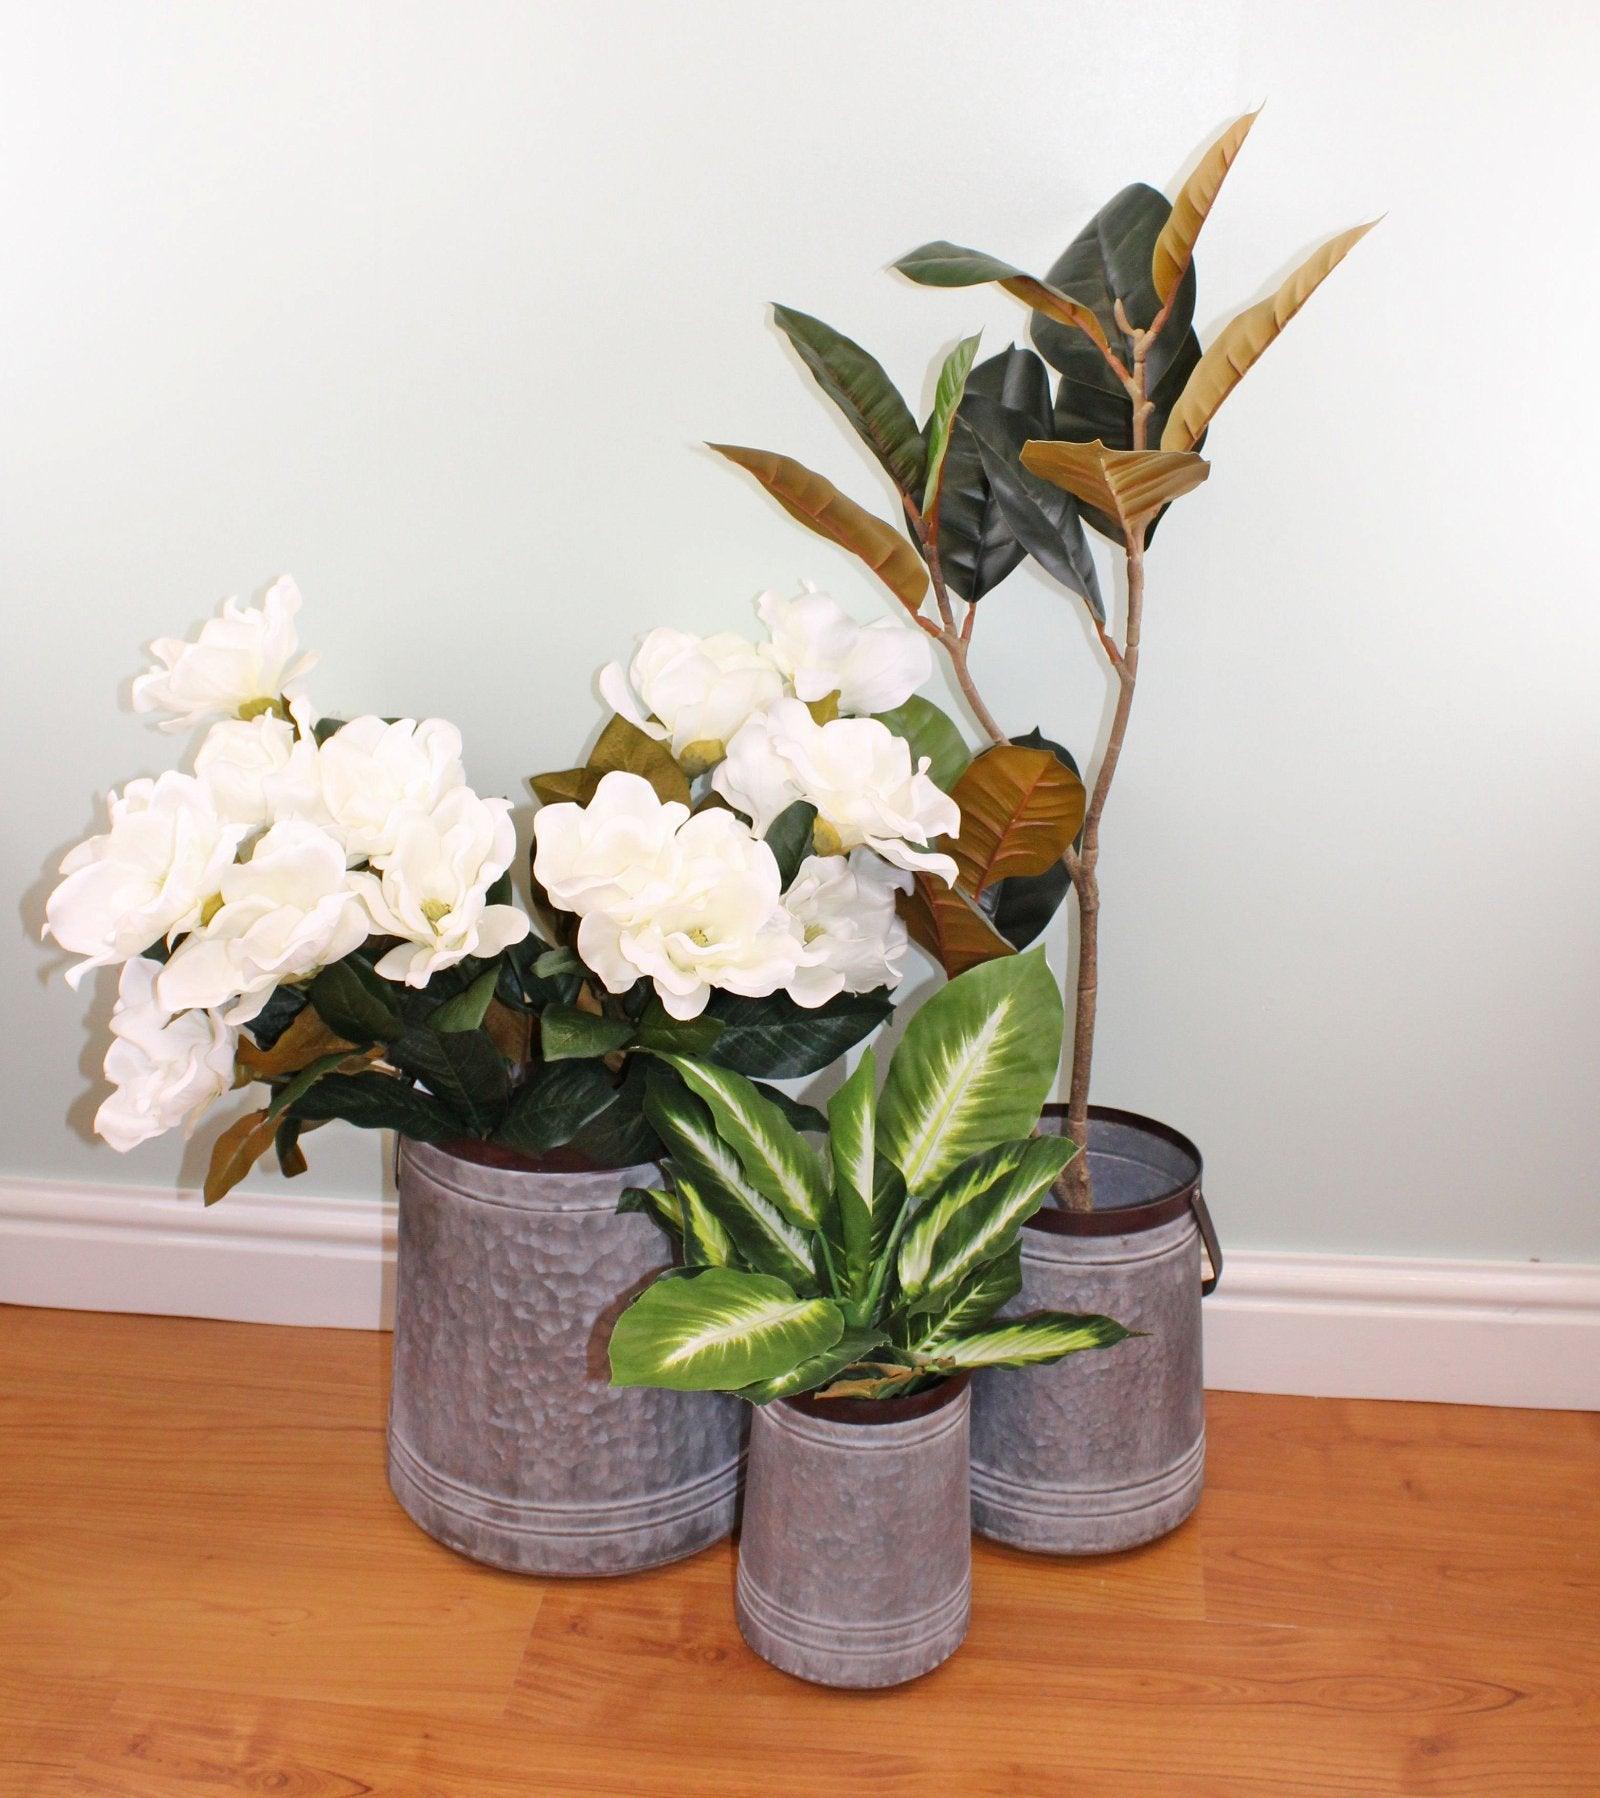 View Set of 3 Bucket Style Metal Planters information